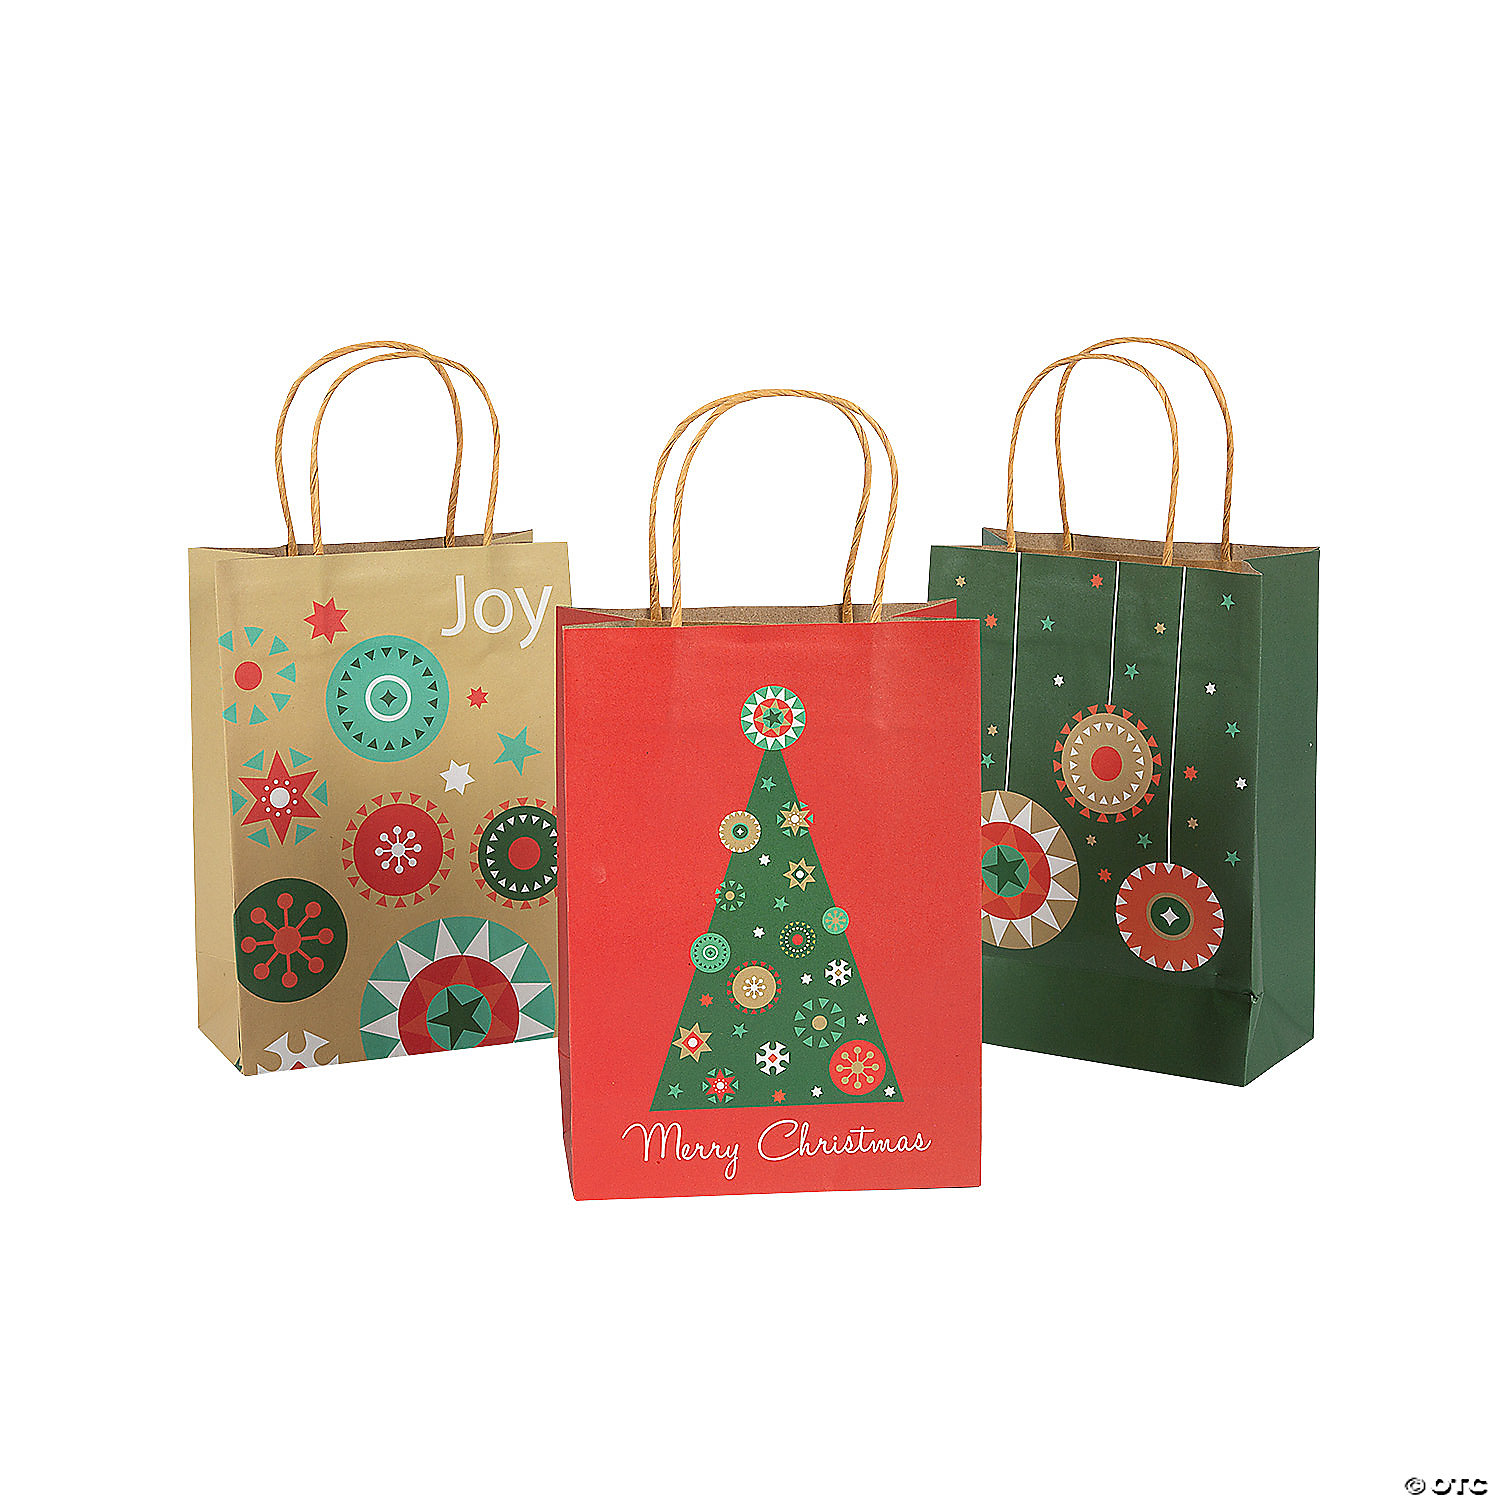 1 of each or 6 of same Christmas Design Bag Xmas Gift Bags 6 Large Assorted 